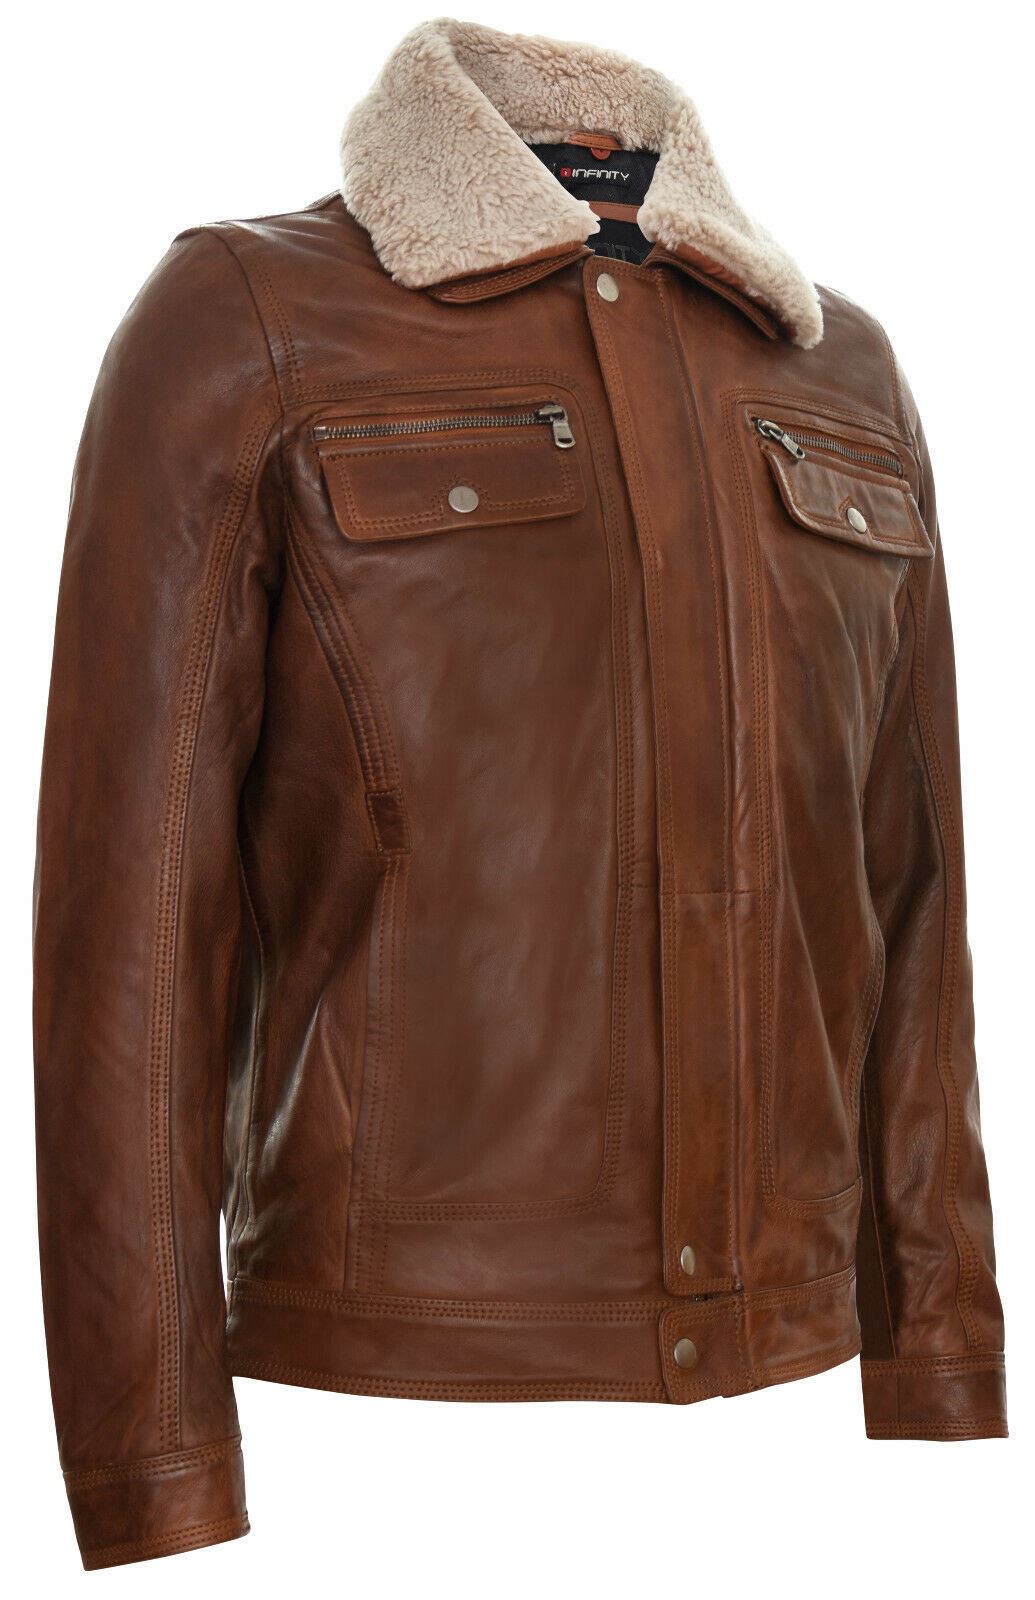 Mens Trucker Style Leather Jacket-Daventry